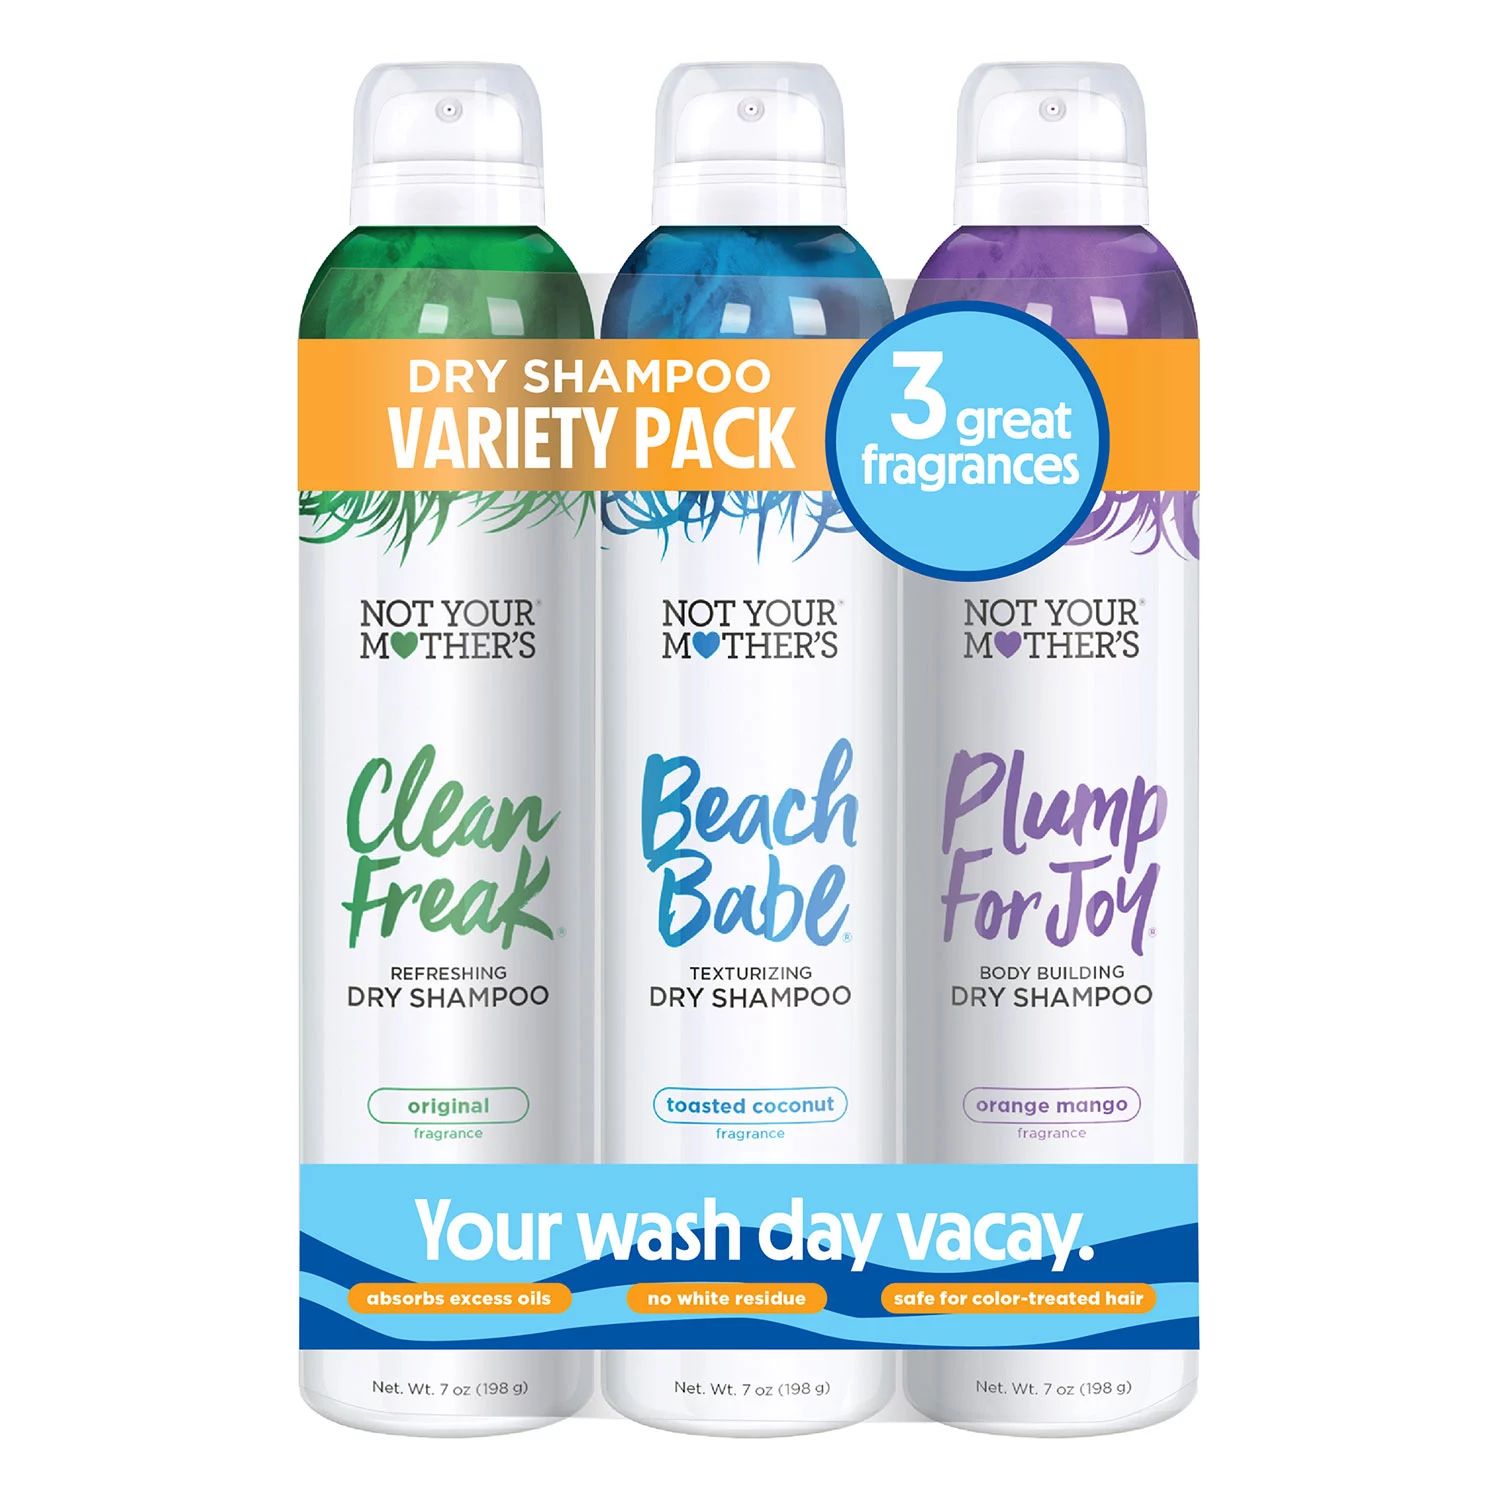 Not Your Mother's Dry Shampoo, 3 Pack (Clean Freak, Beach Babe, Plump for Joy) | Sam's Club